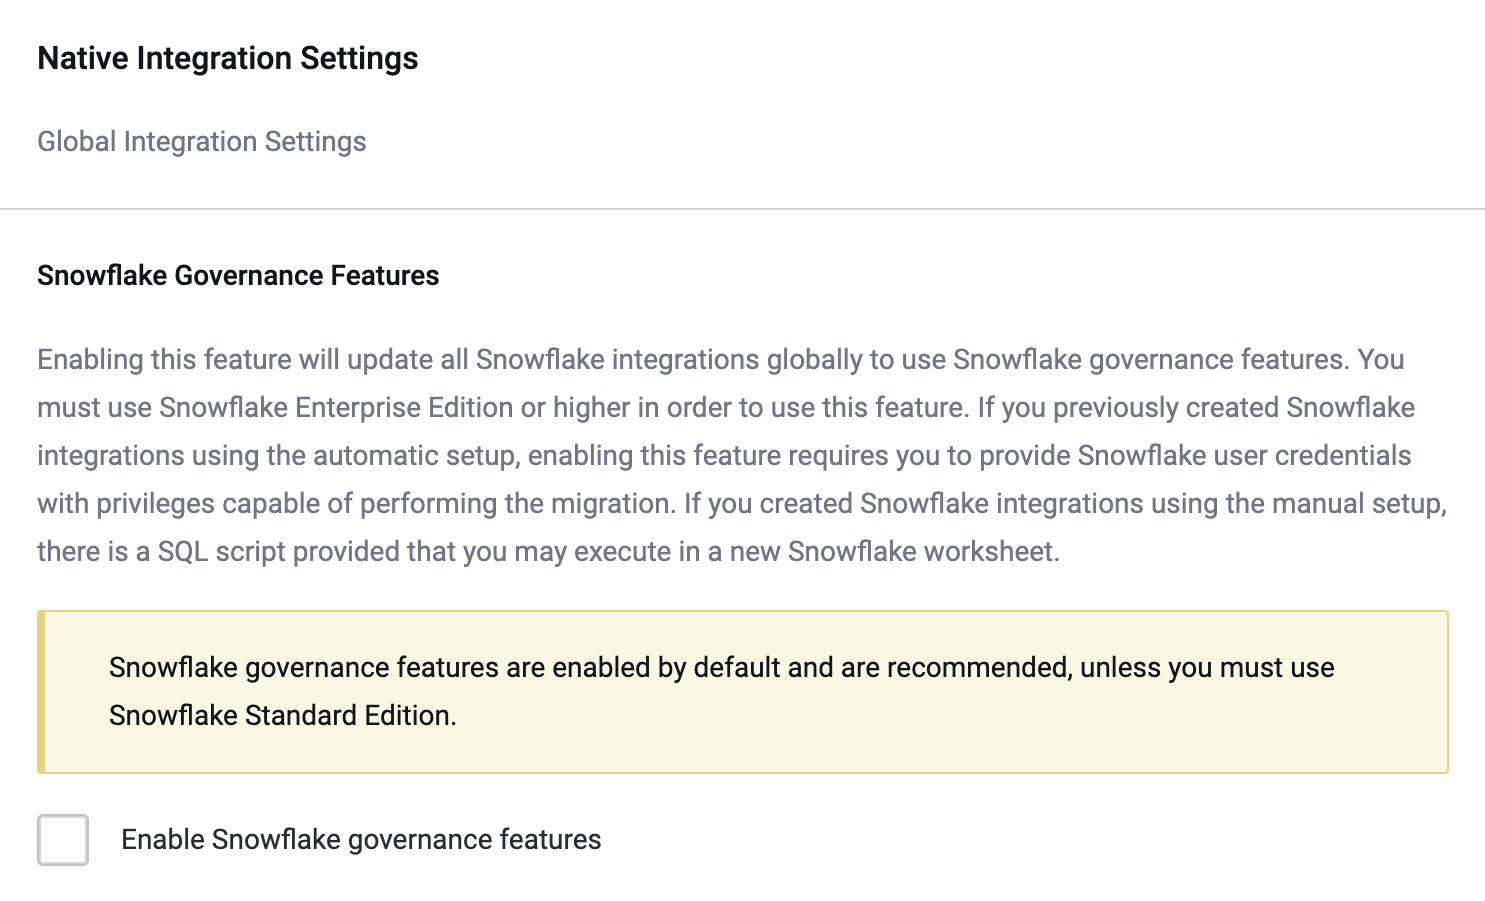 Snowflake Governance Features Checkbox